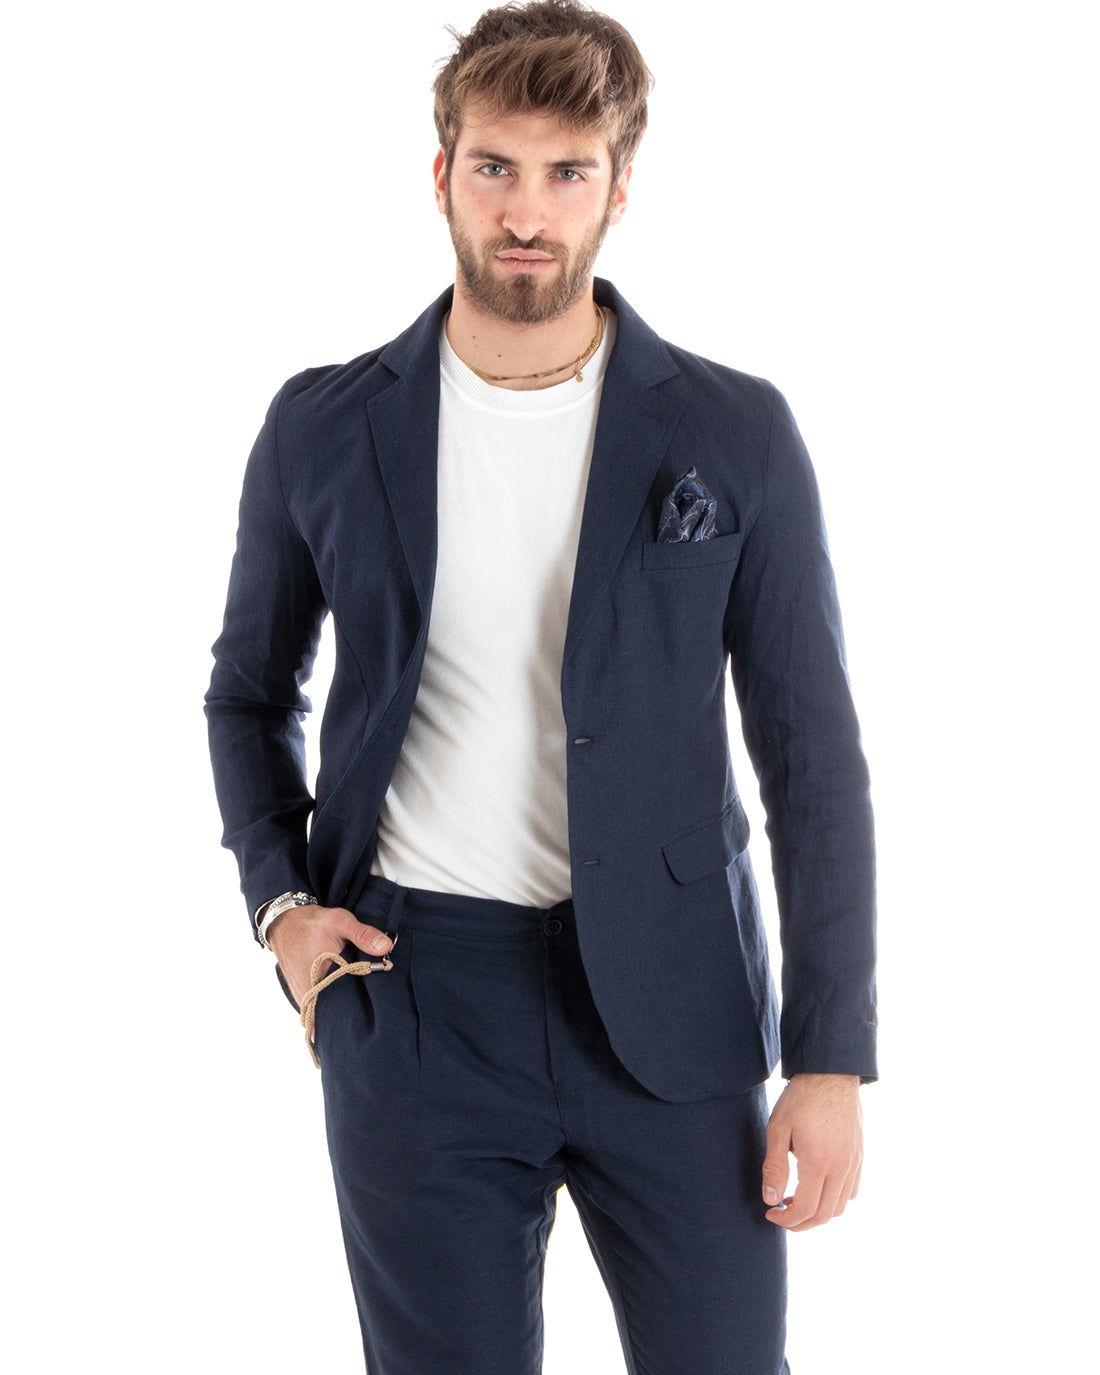 Men's Single-breasted Linen Jacket Solid Color Blue Tailored Ceremony Elegant Casual GIOSAL-G3055A